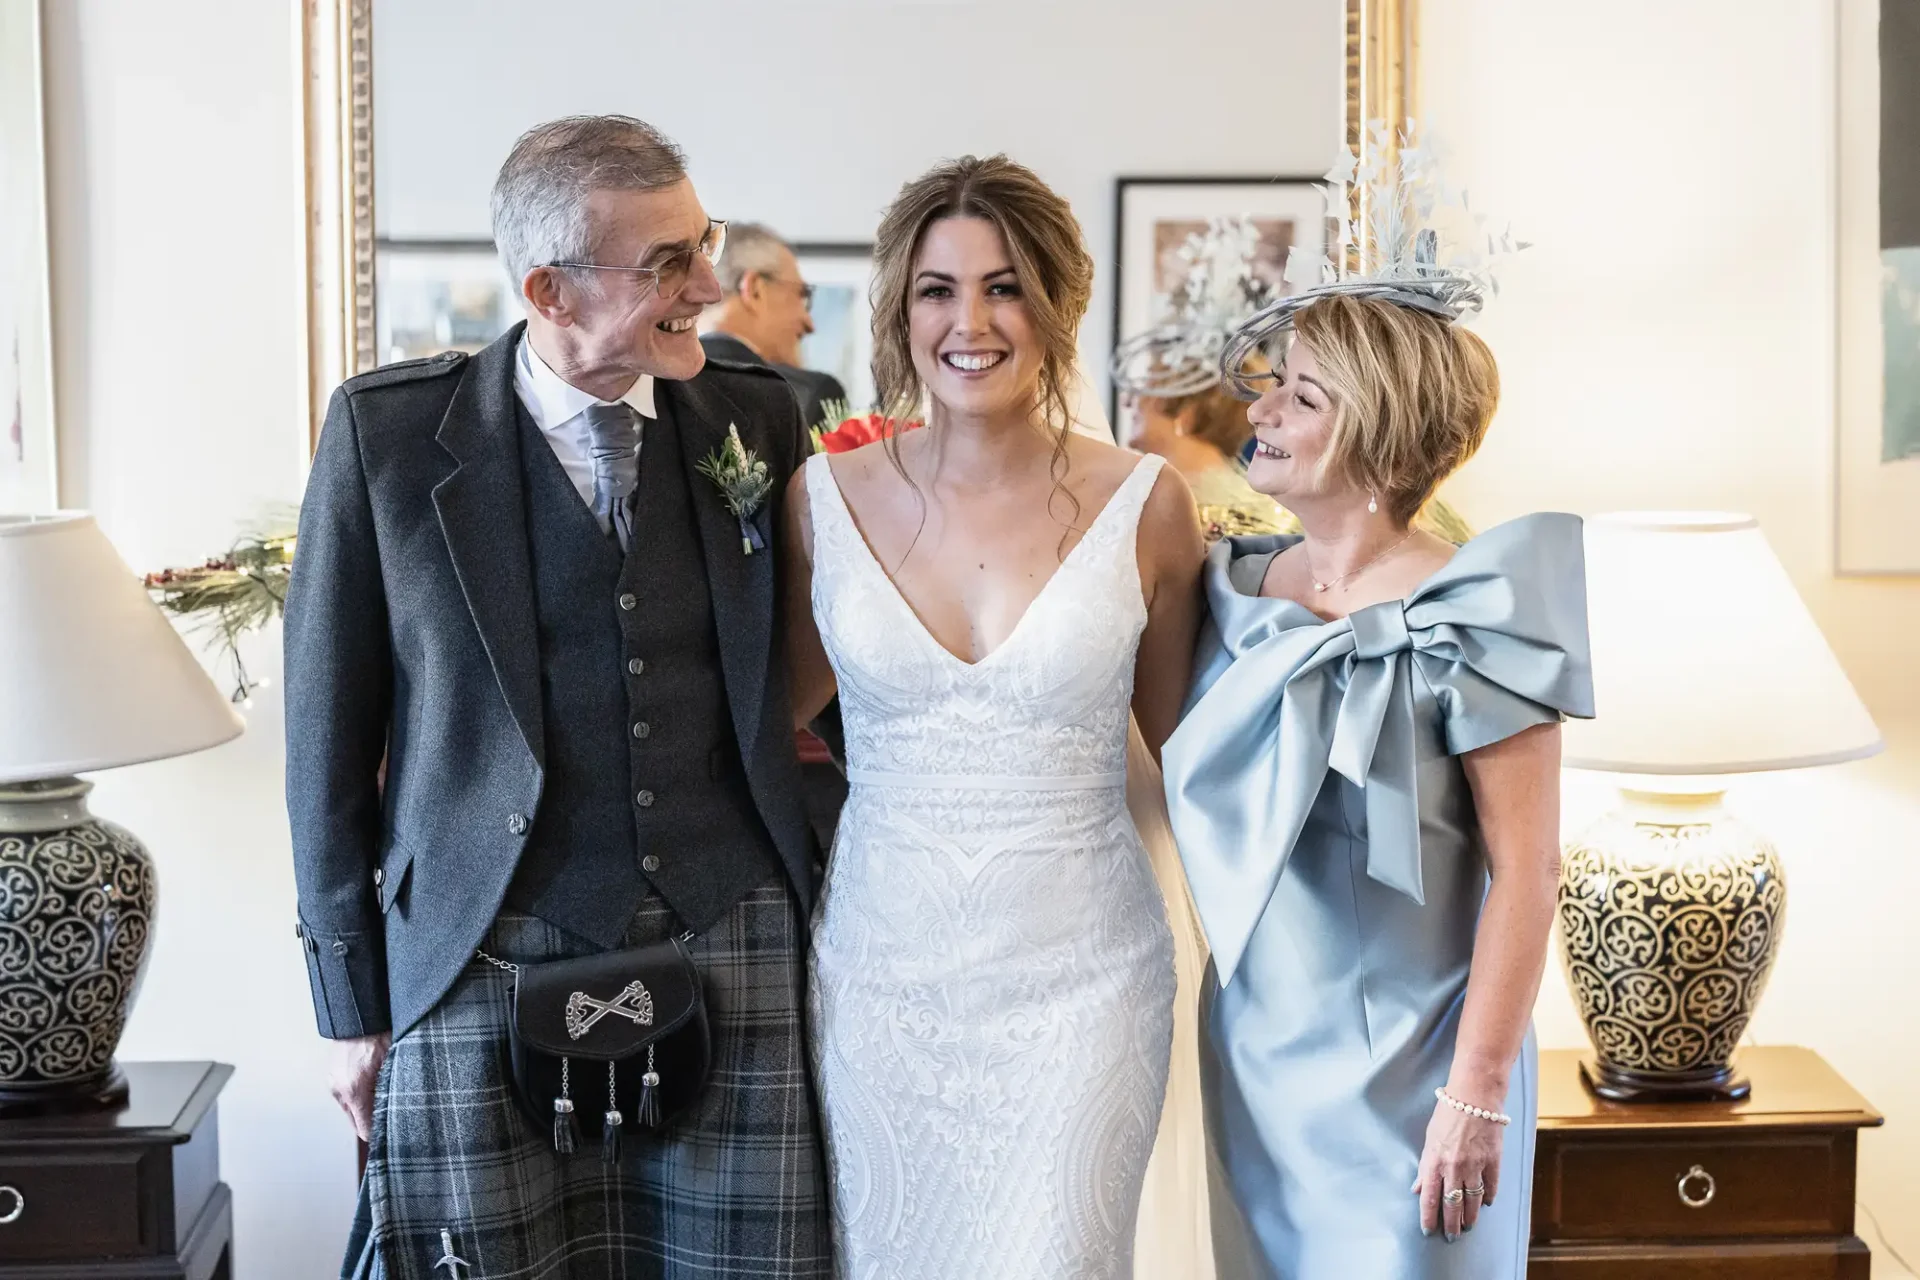 A bride in a white dress smiling with an older man in a kilt and a woman in a blue dress and hat indoors.